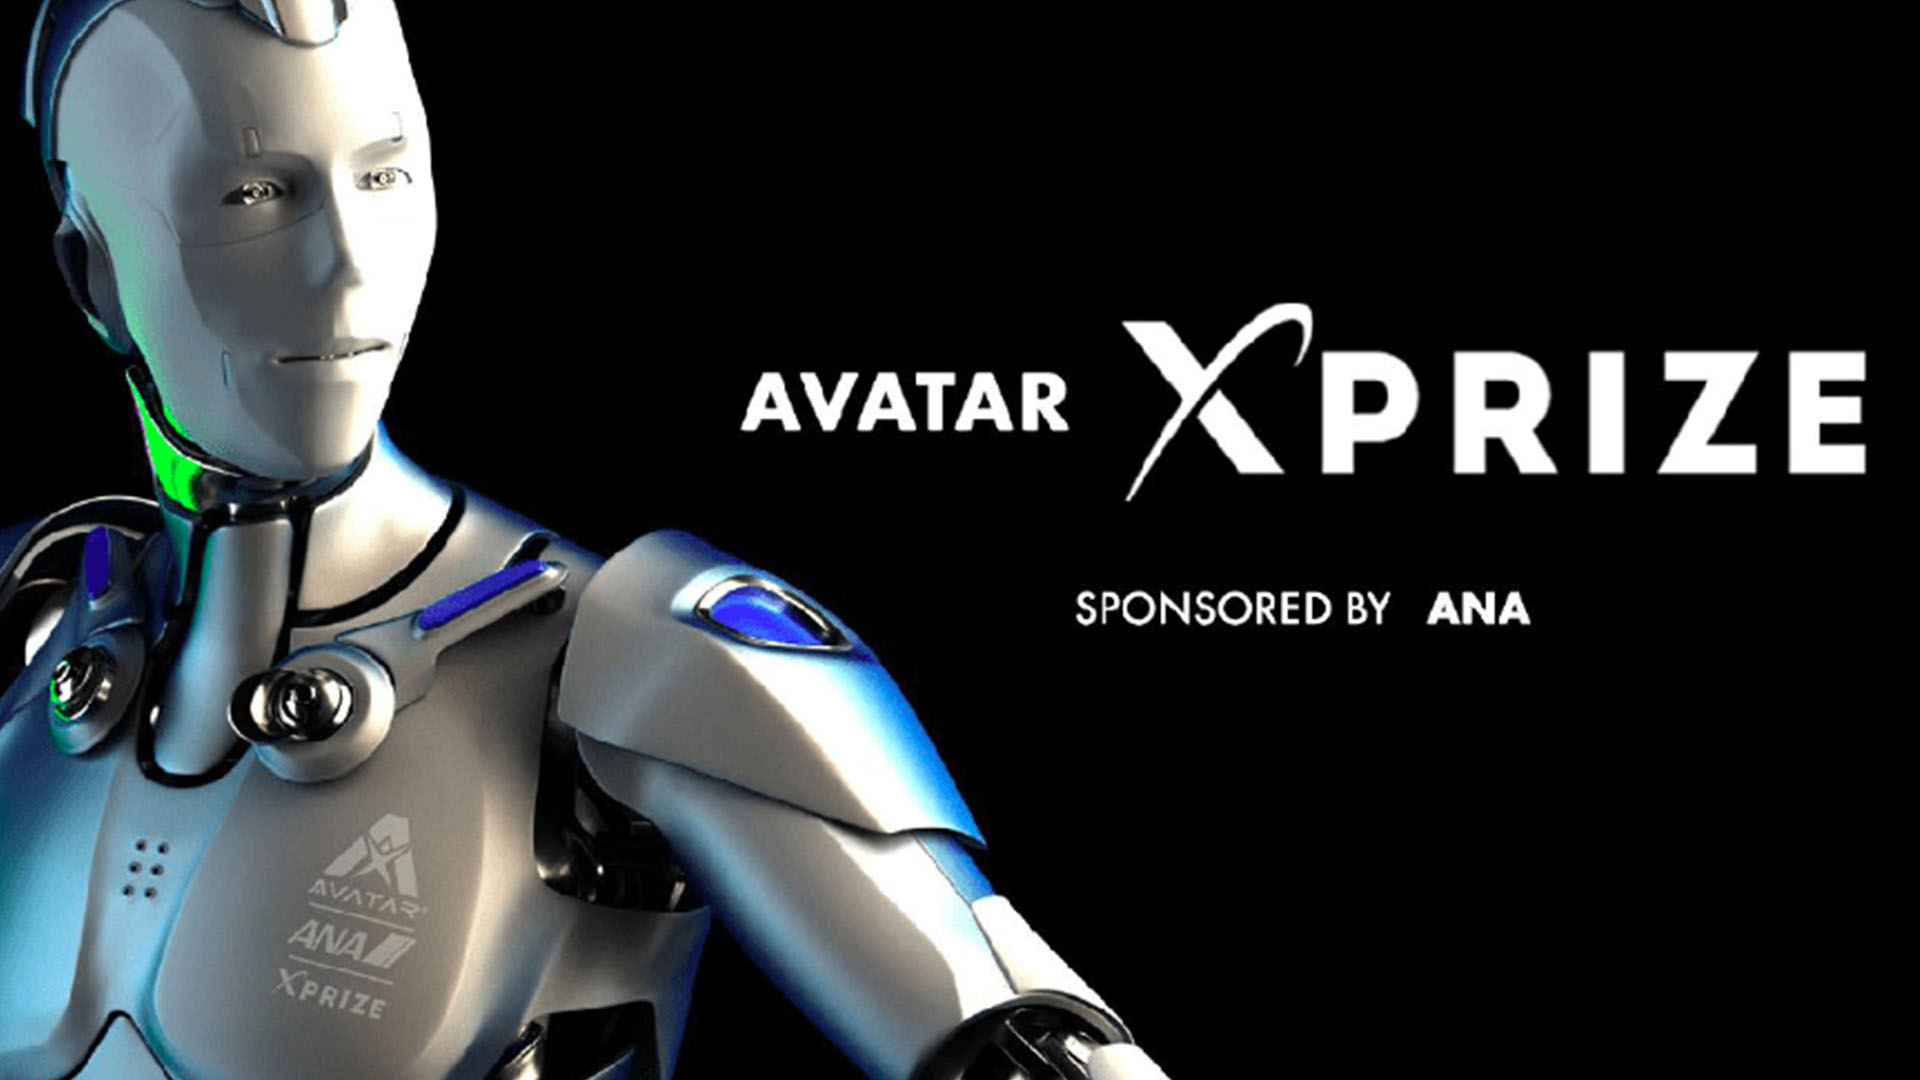 Avatar XPrize: To Transport A Human Presence Anywhere